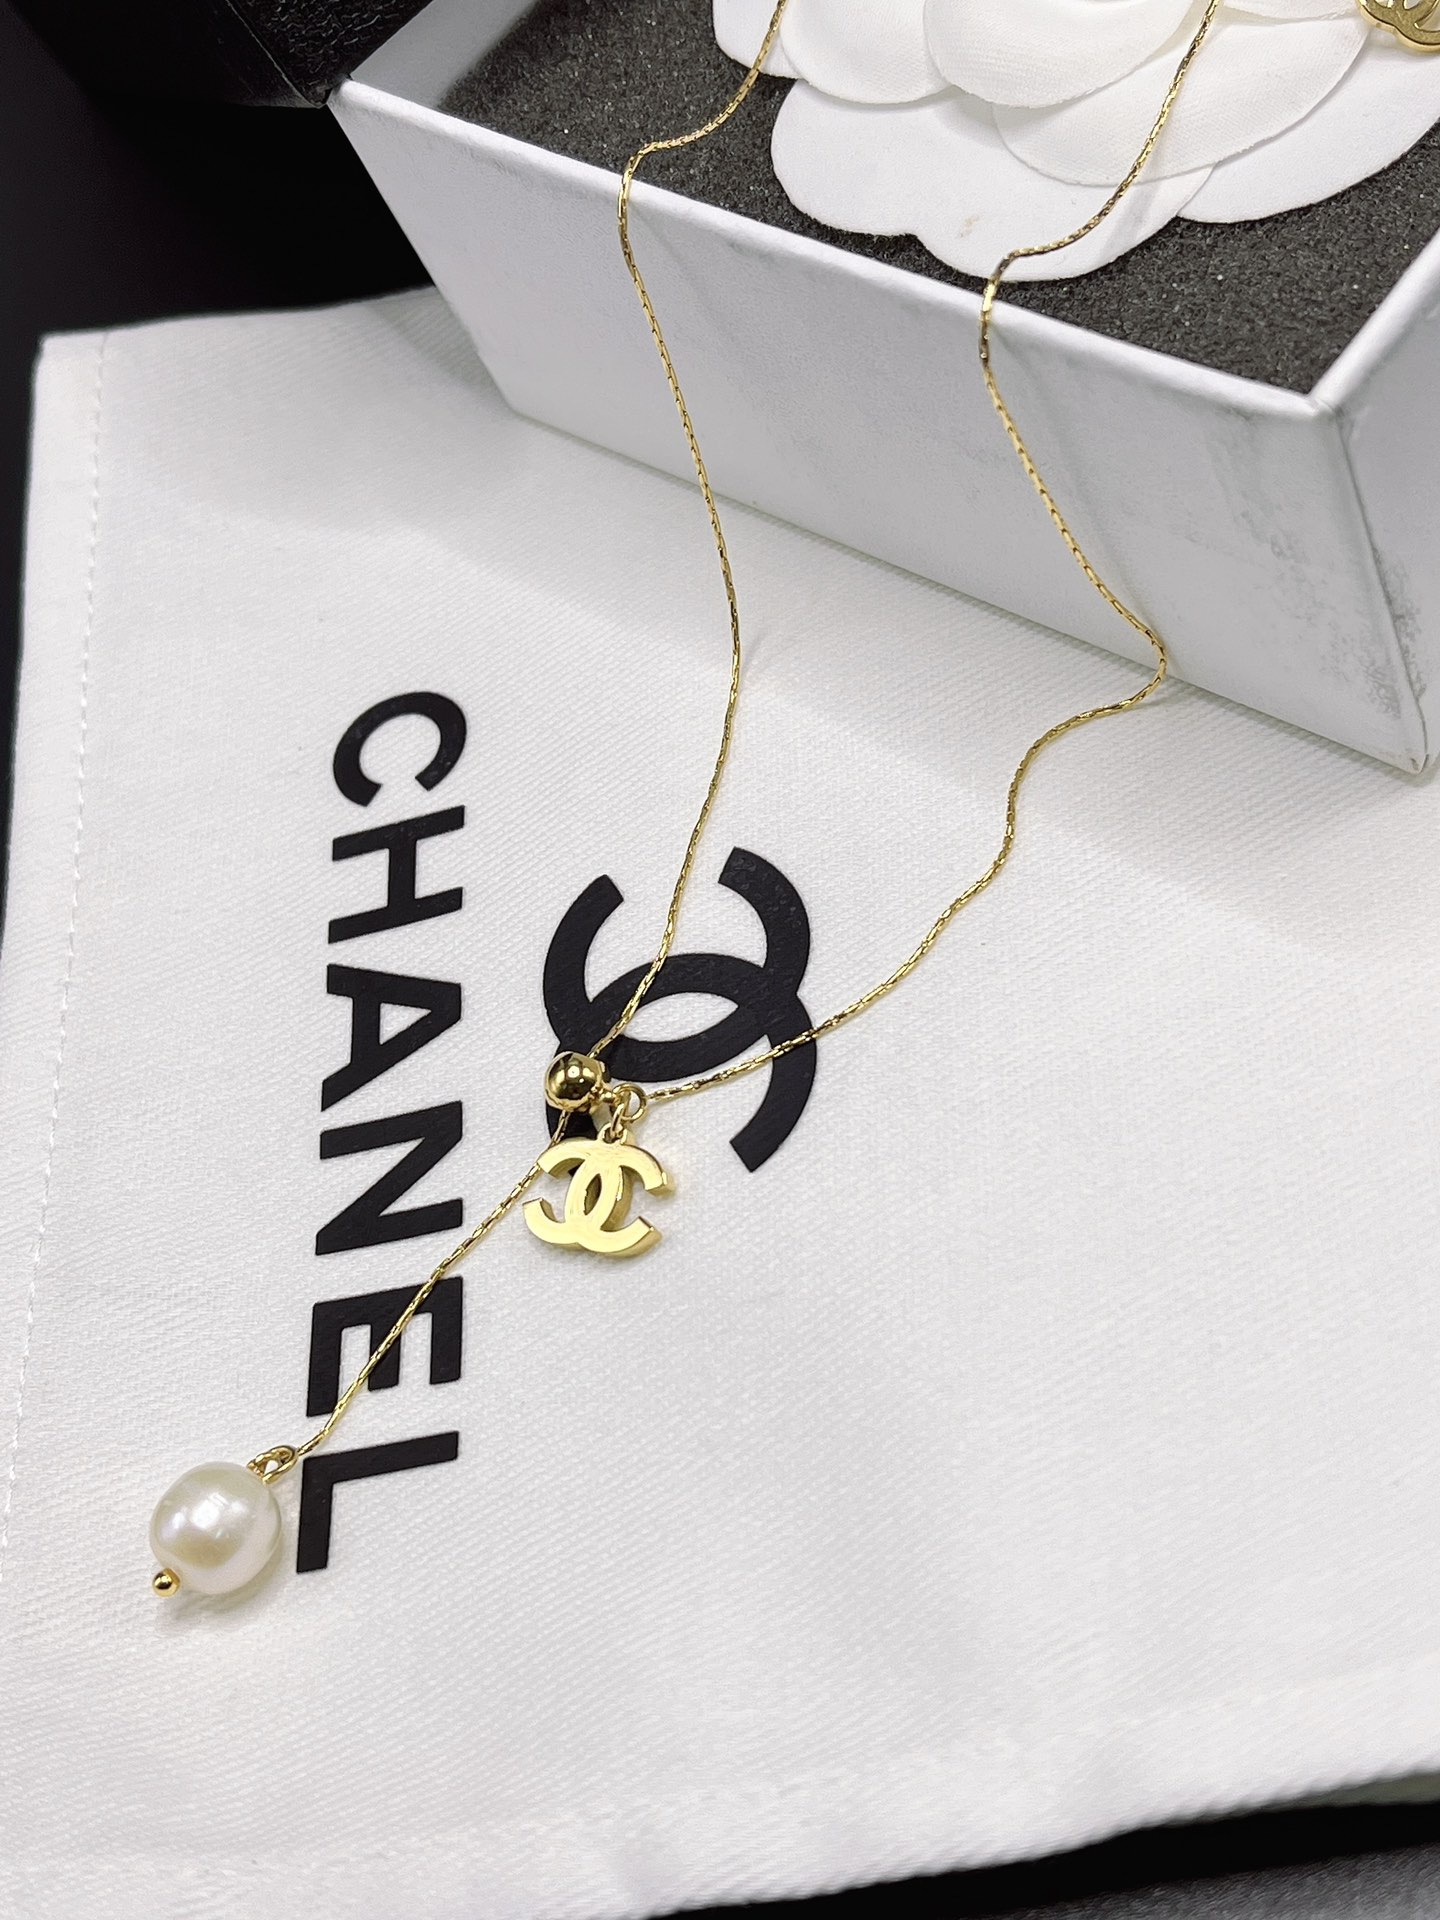 X562 Chanel necklace